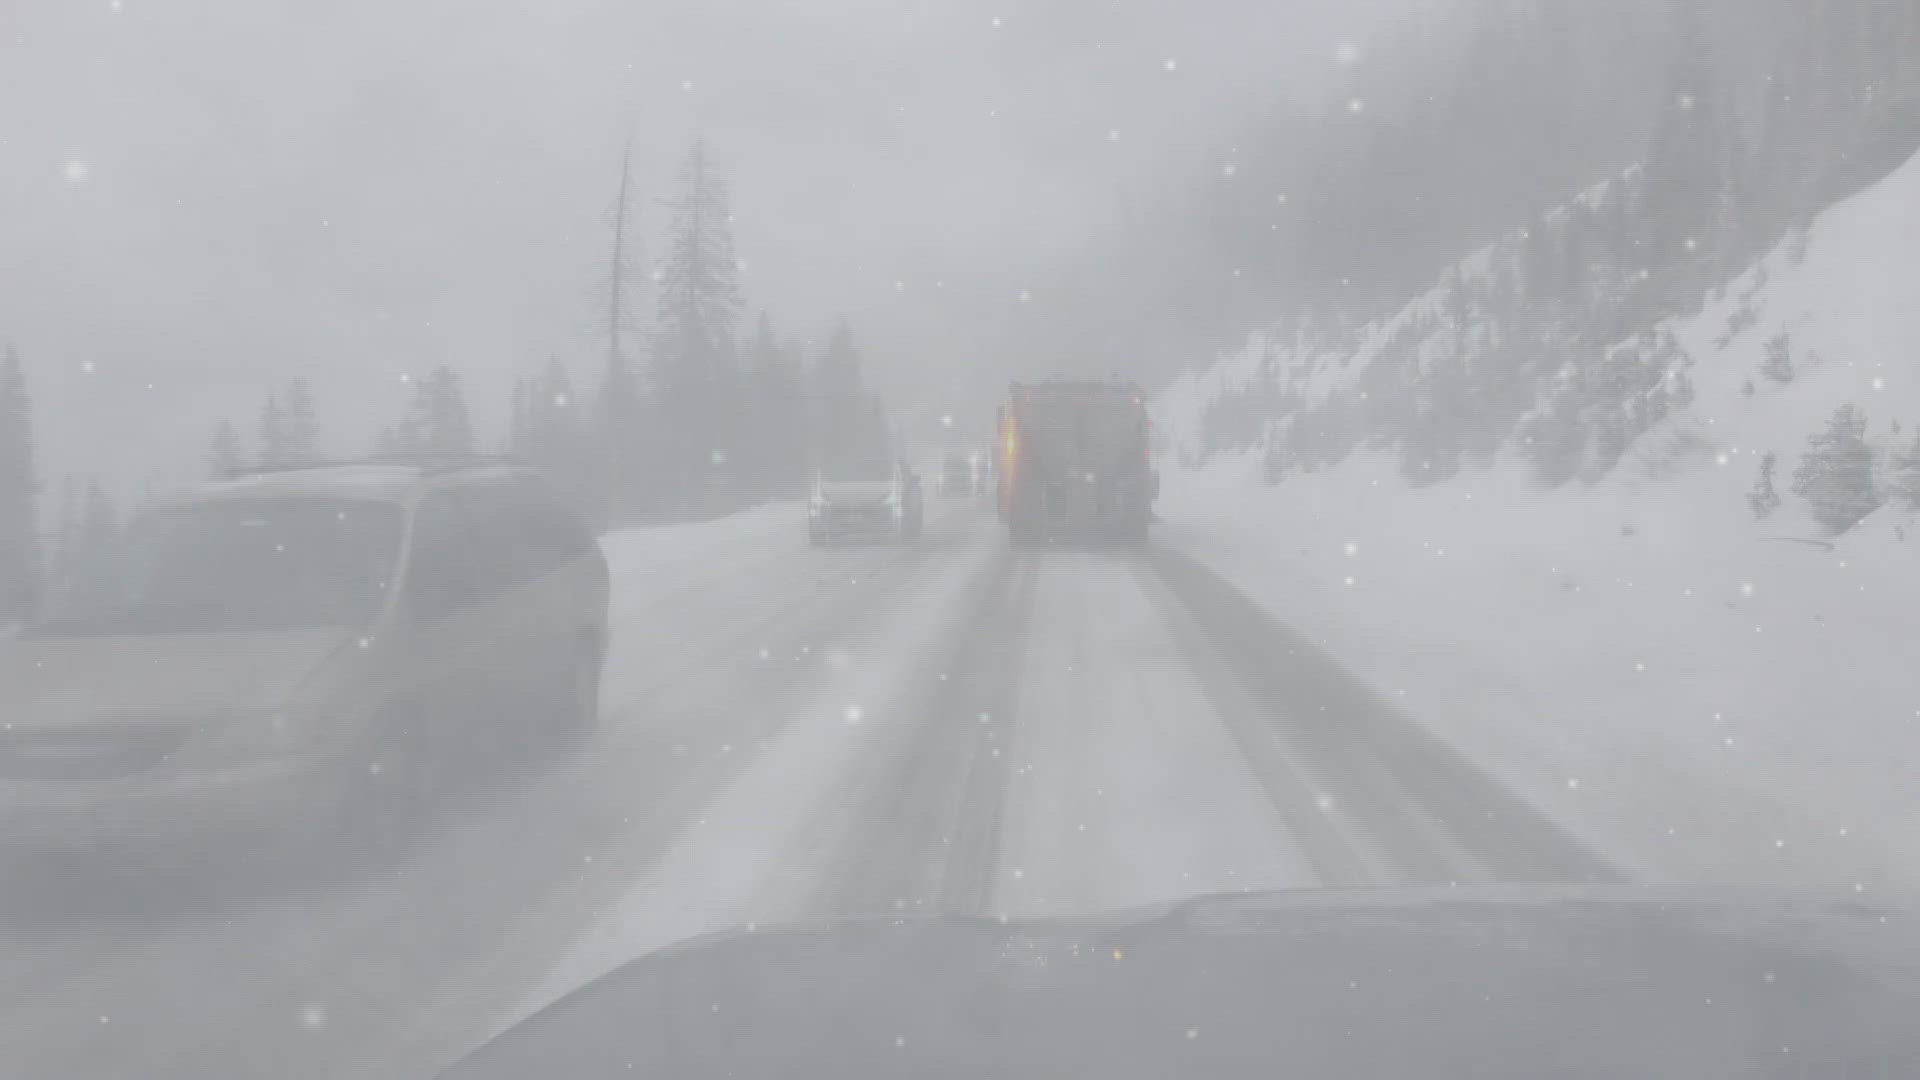 Winter storms can bring quick bursts of heavy snow, called snow squalls, through Colorado.